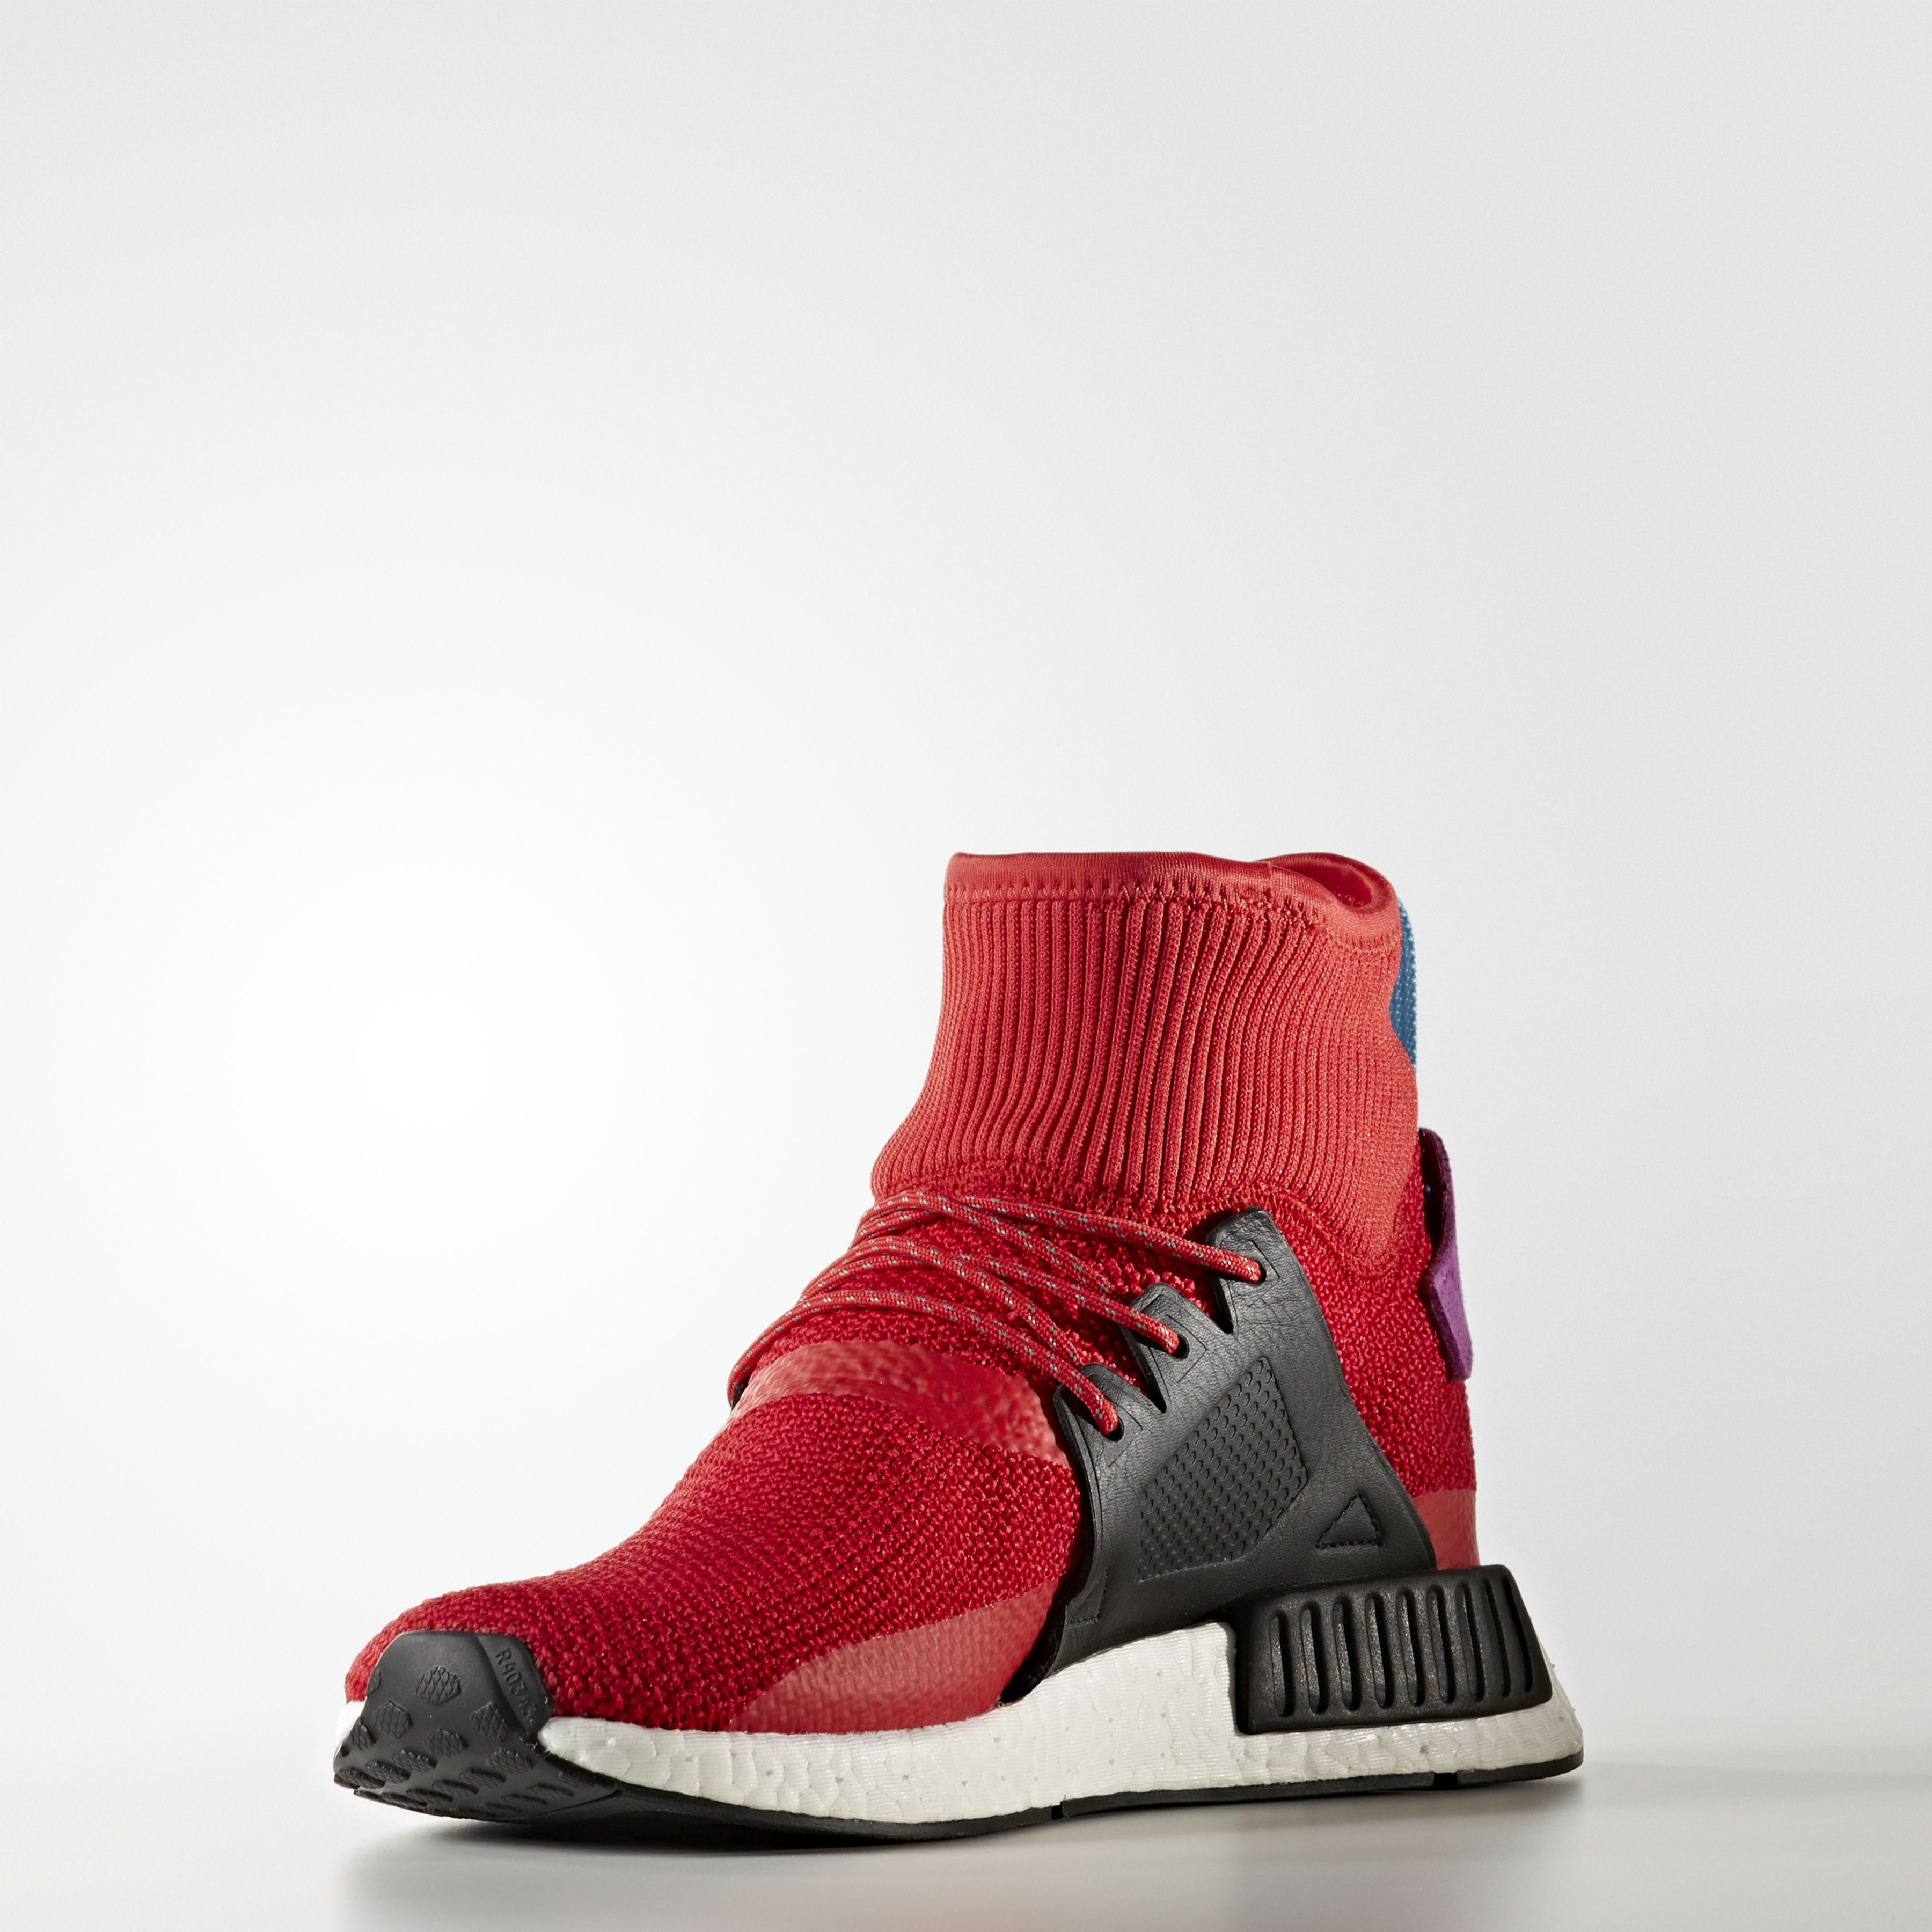 Adidas NMD XR1 AND REVIEW ON FEET YouTube